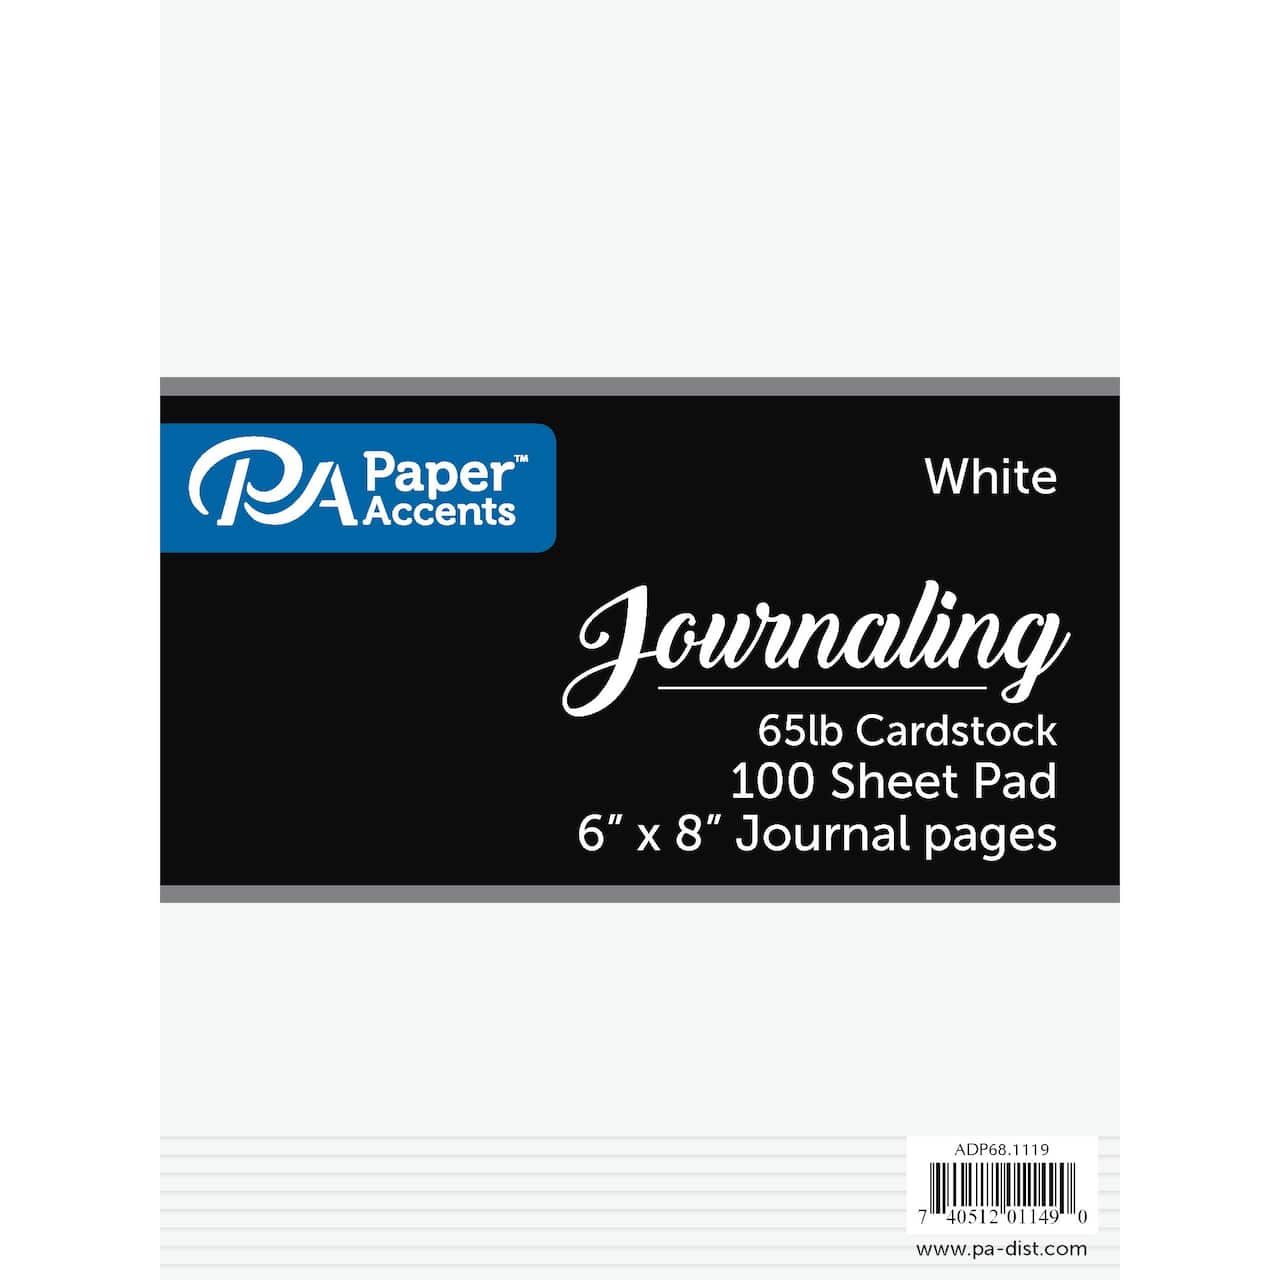 PA Paper™ Accents White Journaling Cardstock Paper Pad, 6 x 8